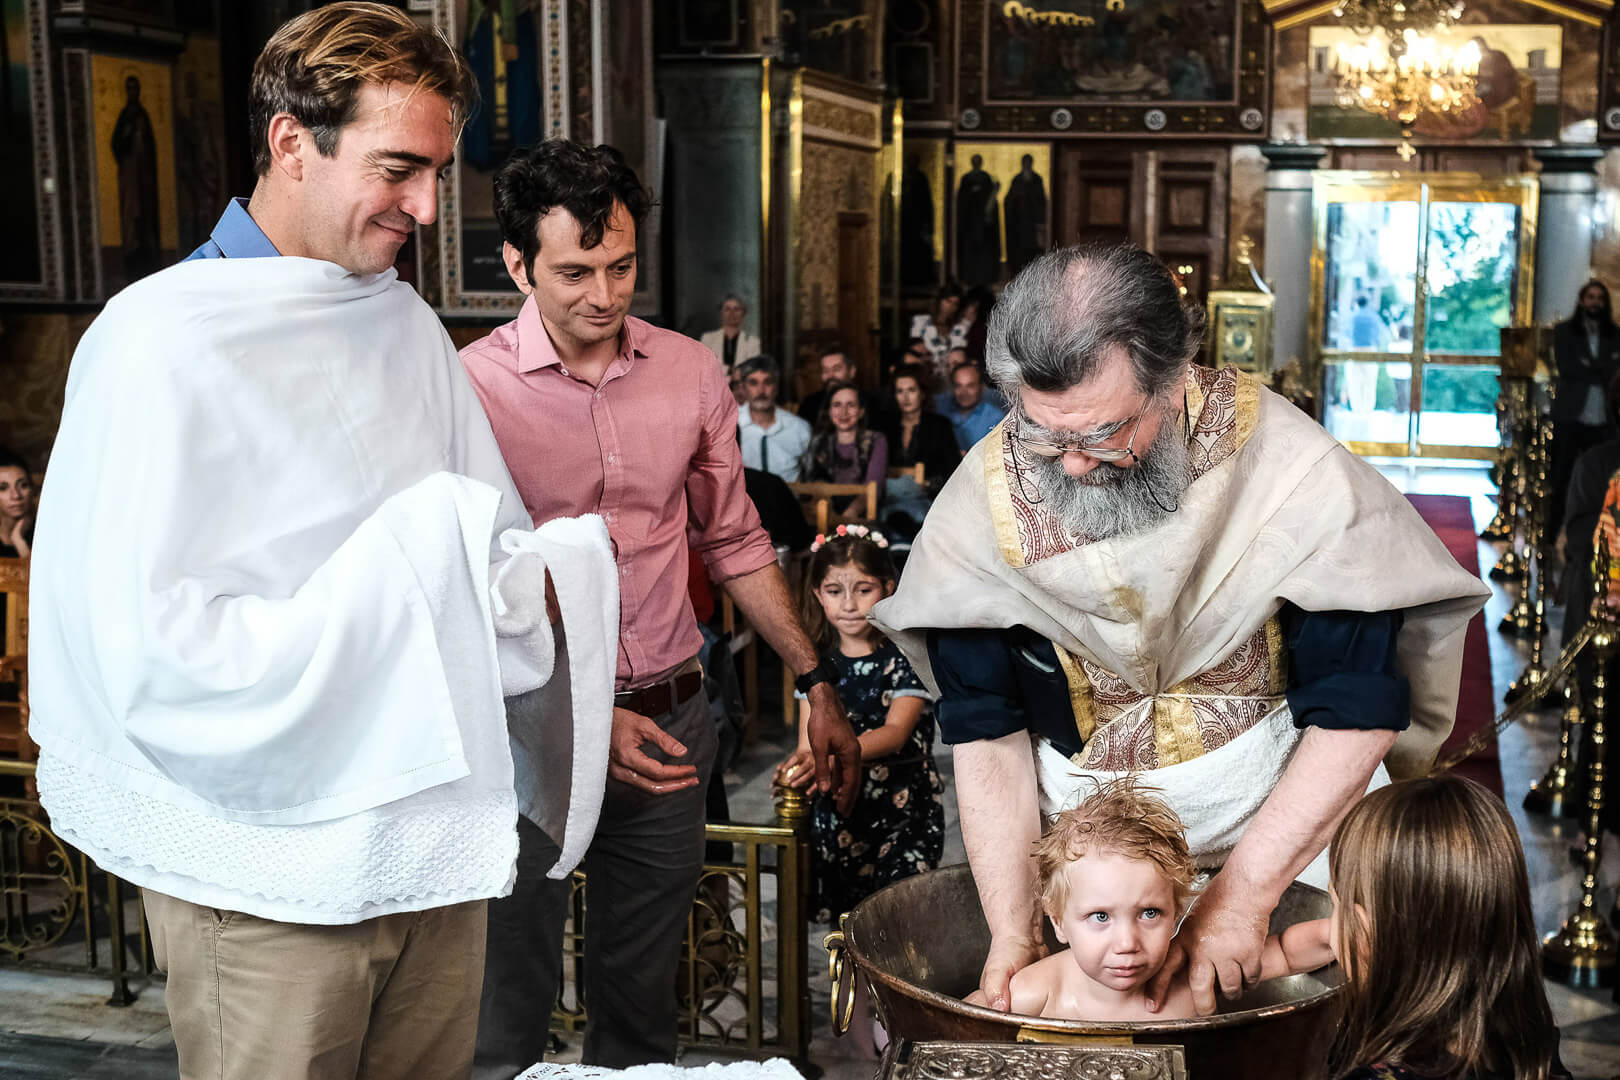 Greek christening traditions: two godfathers stand by as baby receives blessings at baptism.